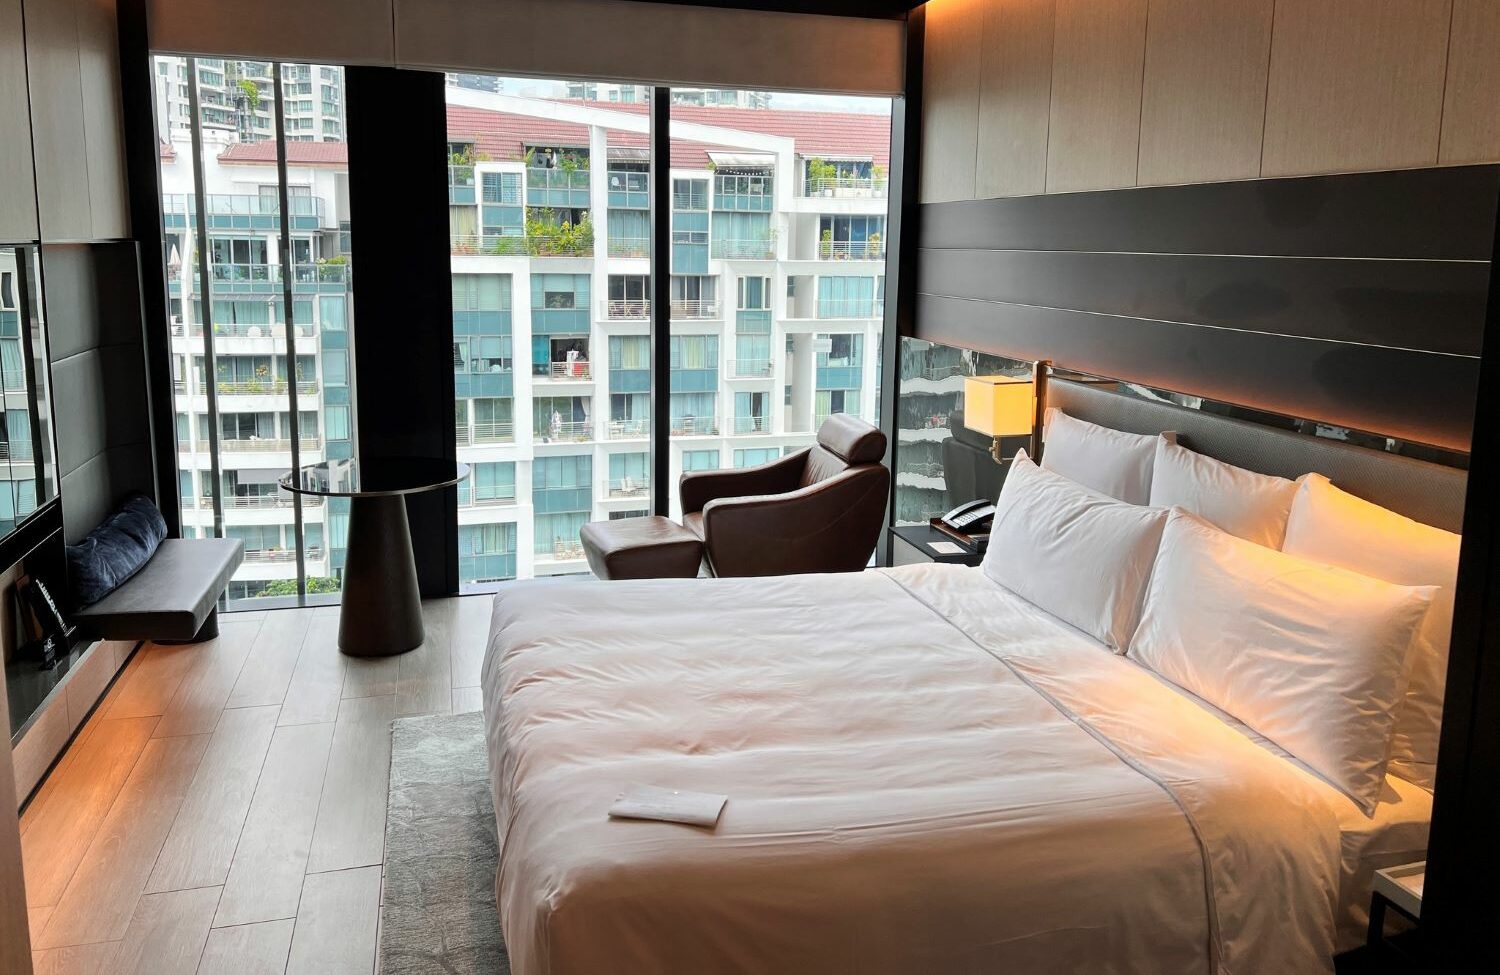 1Review of InterContinental Robertson Quay, Singapore